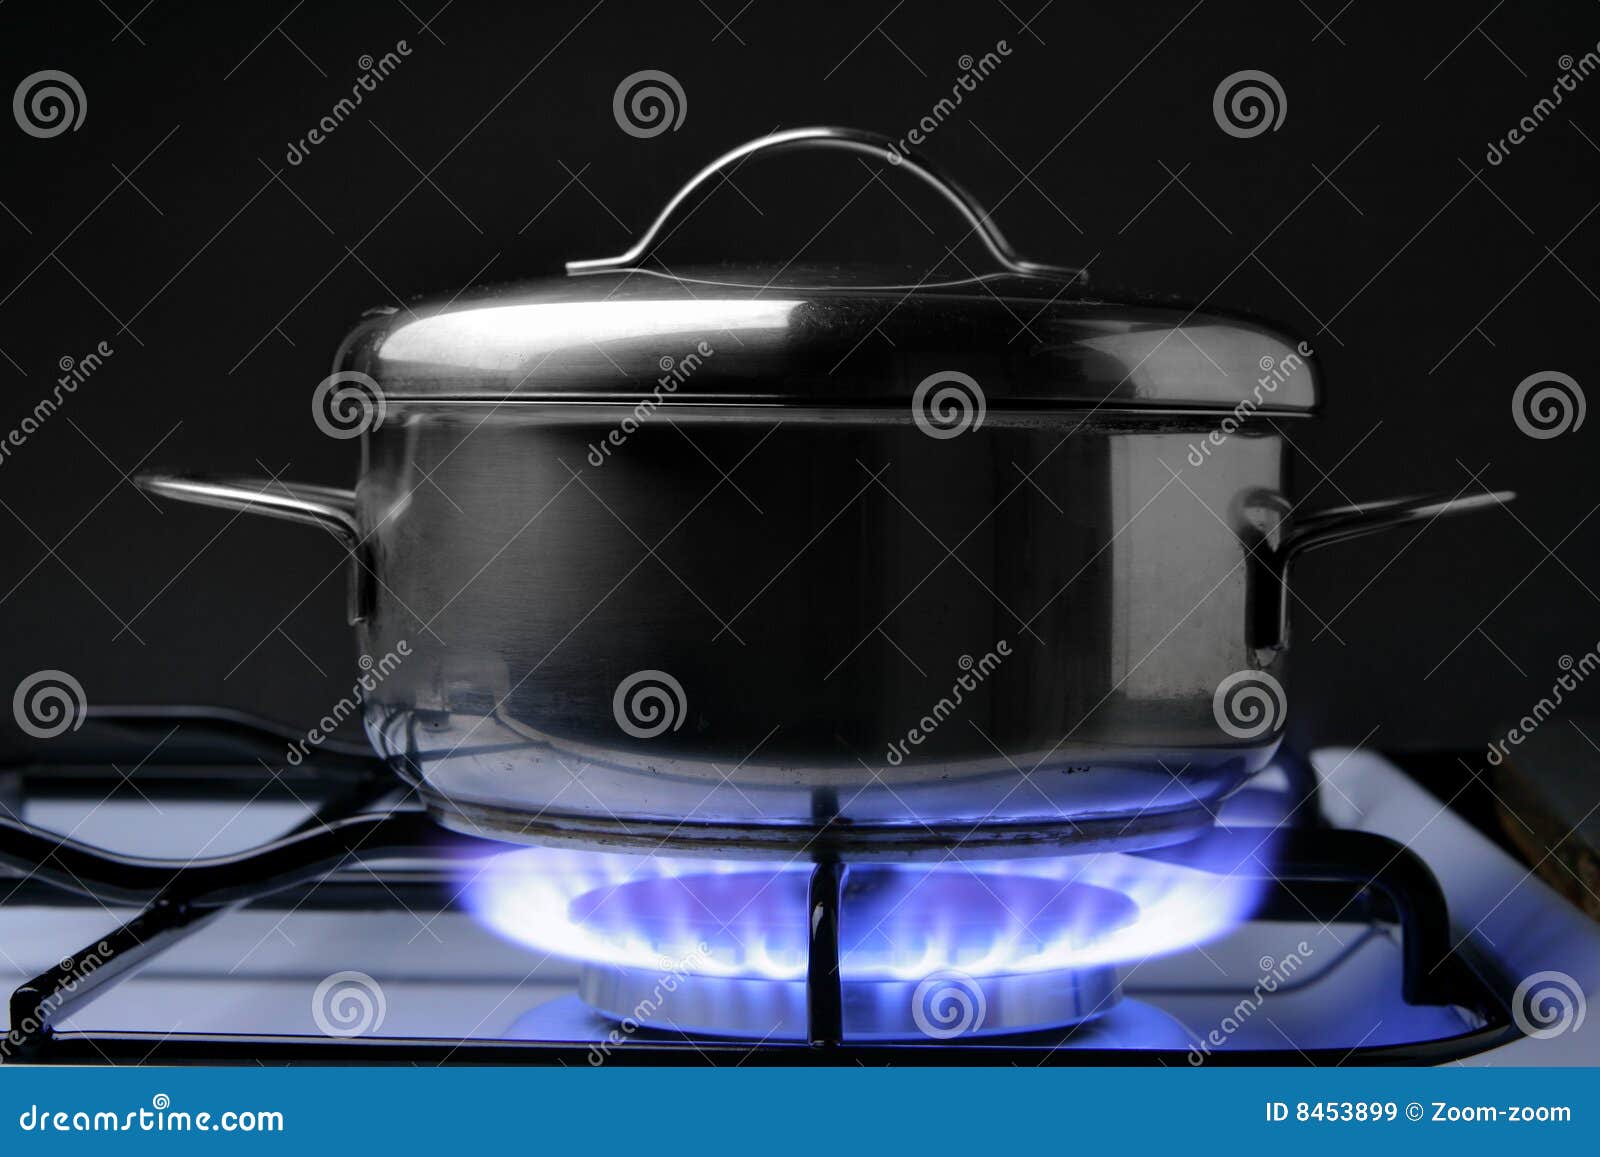 crock on the gas stove